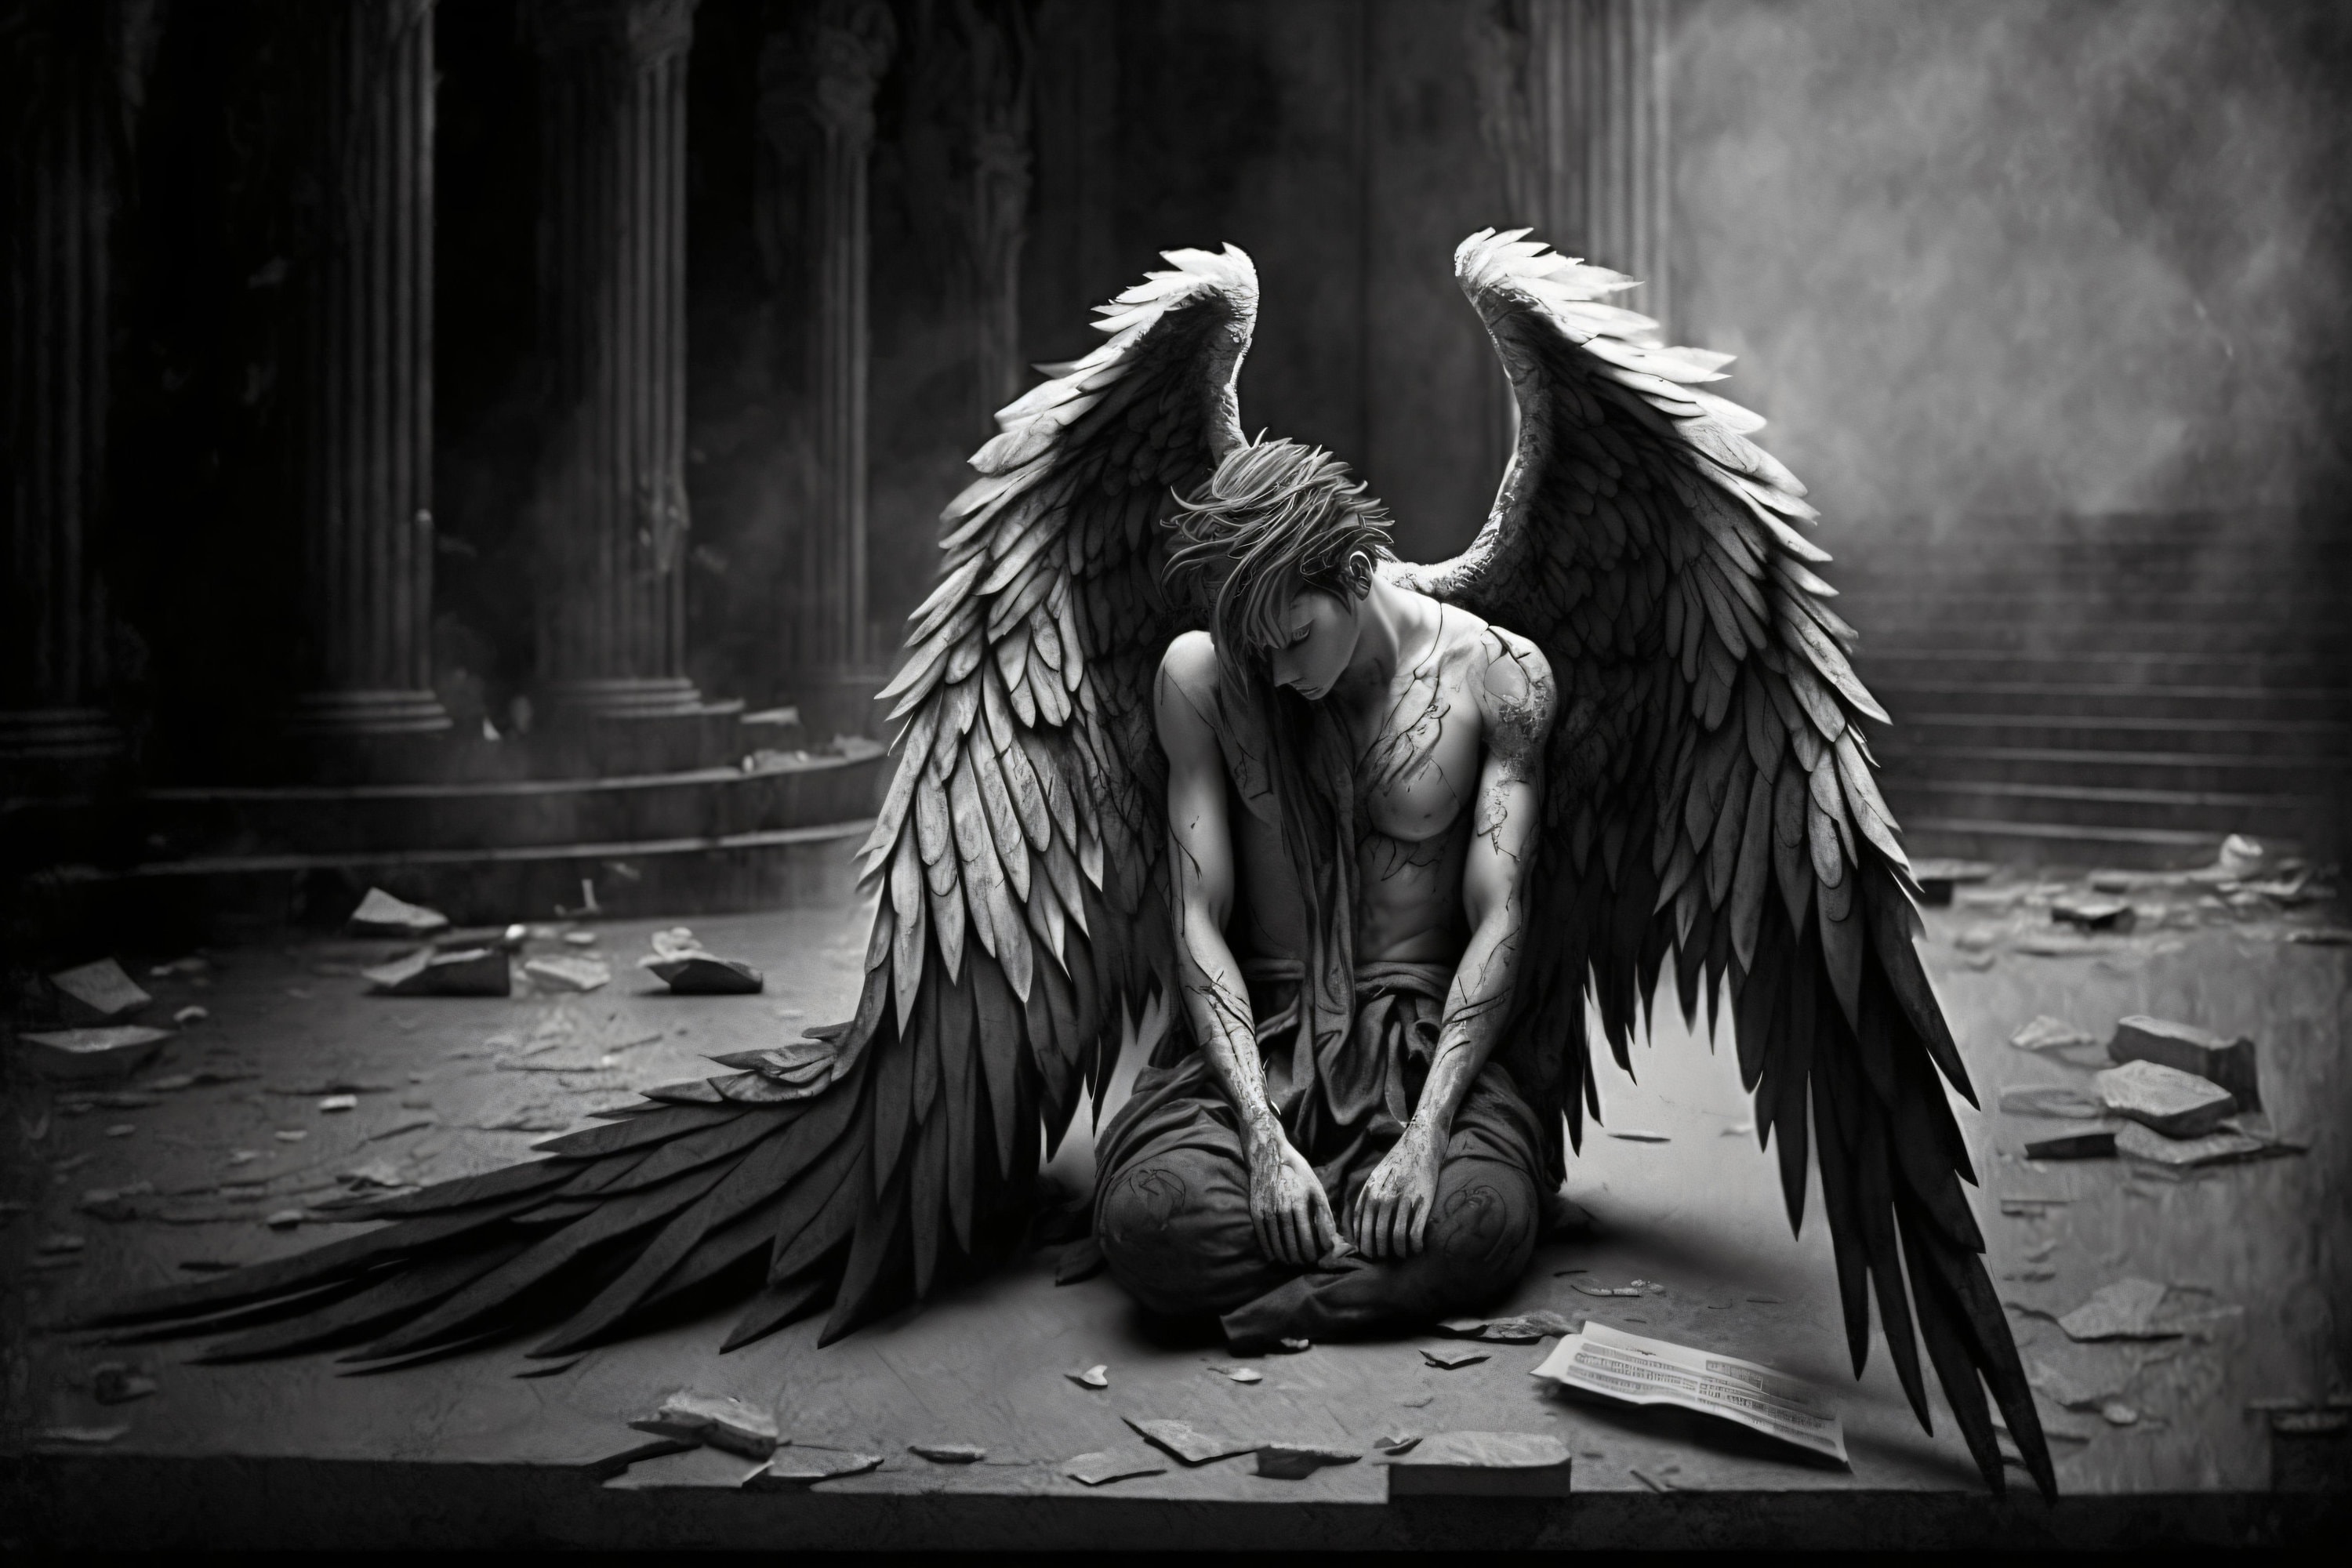 Fallen Angel - Canvas, Metal, Acrylic, or Giclee Quality Prints - Mounting  Hardware Included!